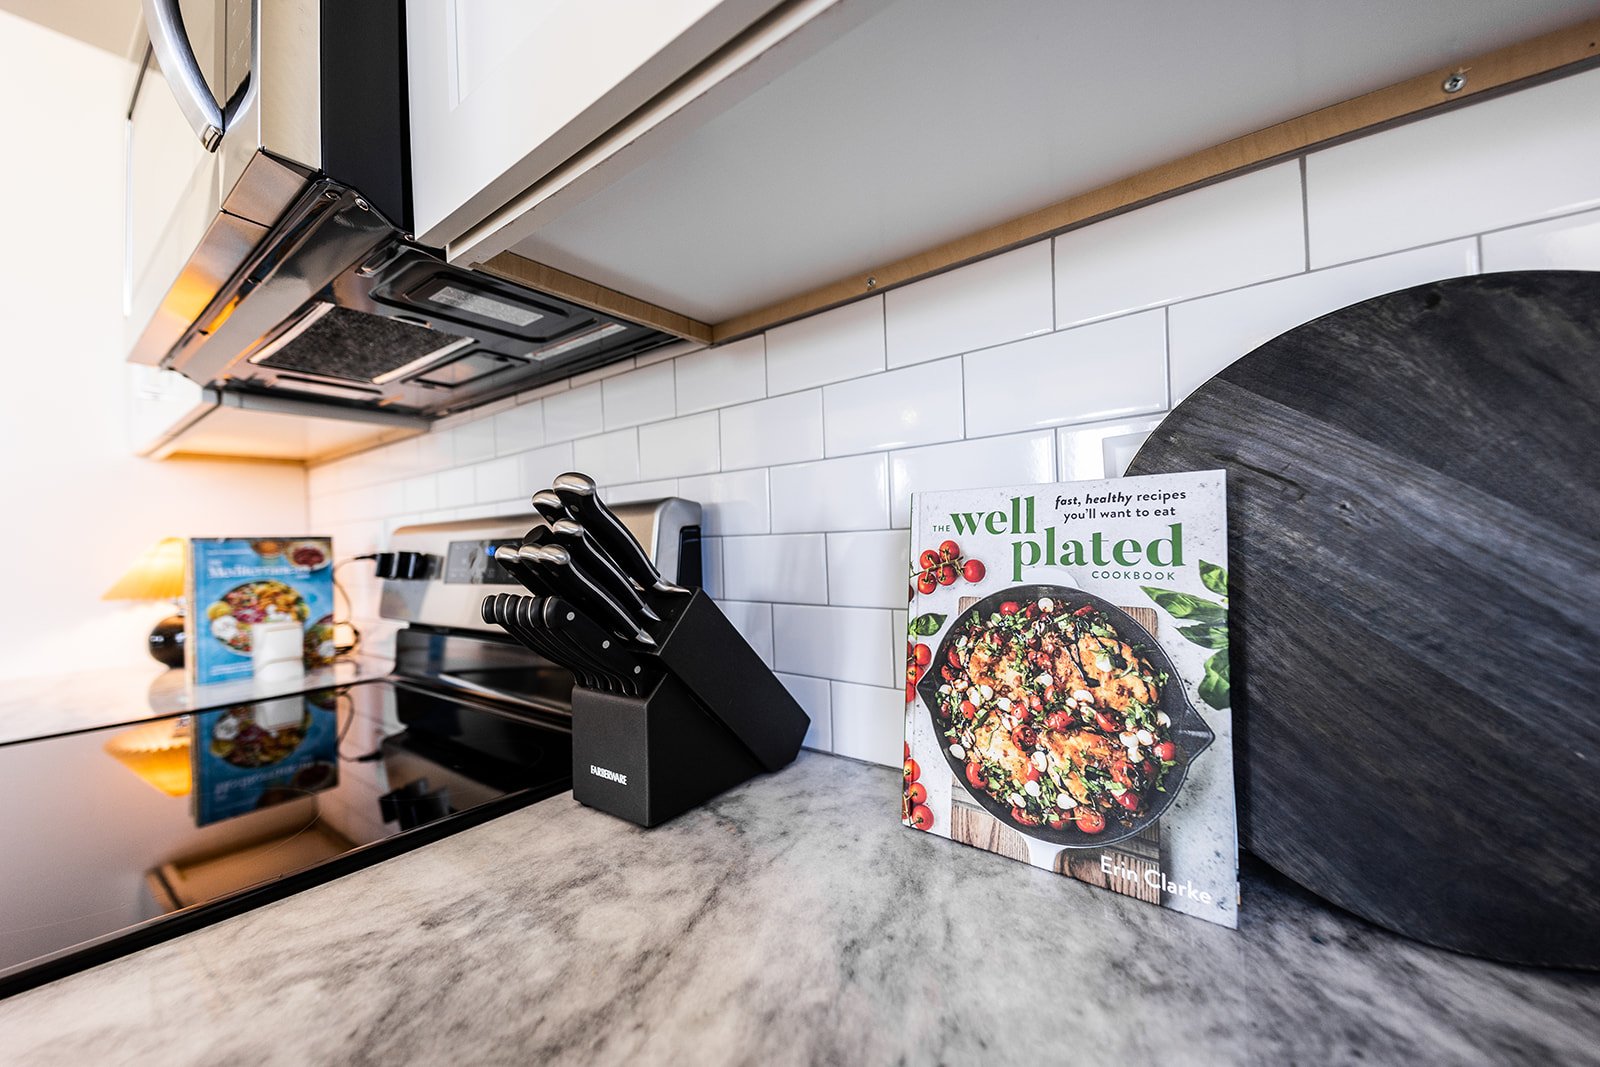 Unit 2: Fully equipped kitchen stocked with your basic cooking essentials. Complete with stainless steel appliances and breakfast bar seating. (2nd floor)